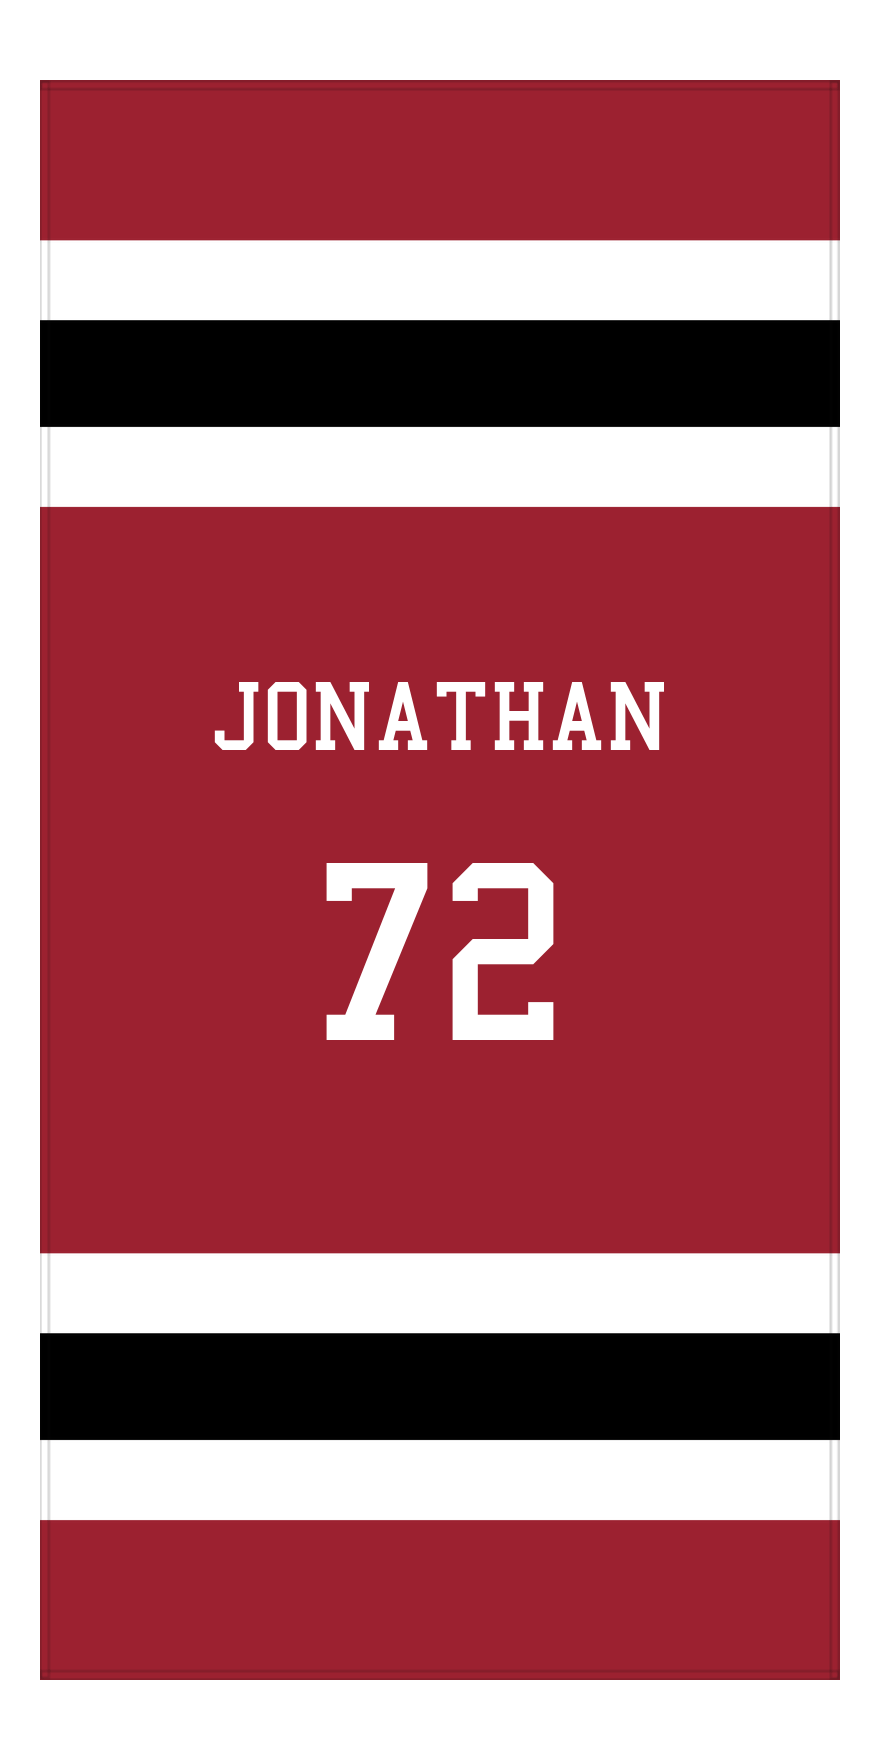 Personalized Jersey Number 1-on-1 Stripes Sports Beach Towel - Red and Black - Vertical Design - Front View